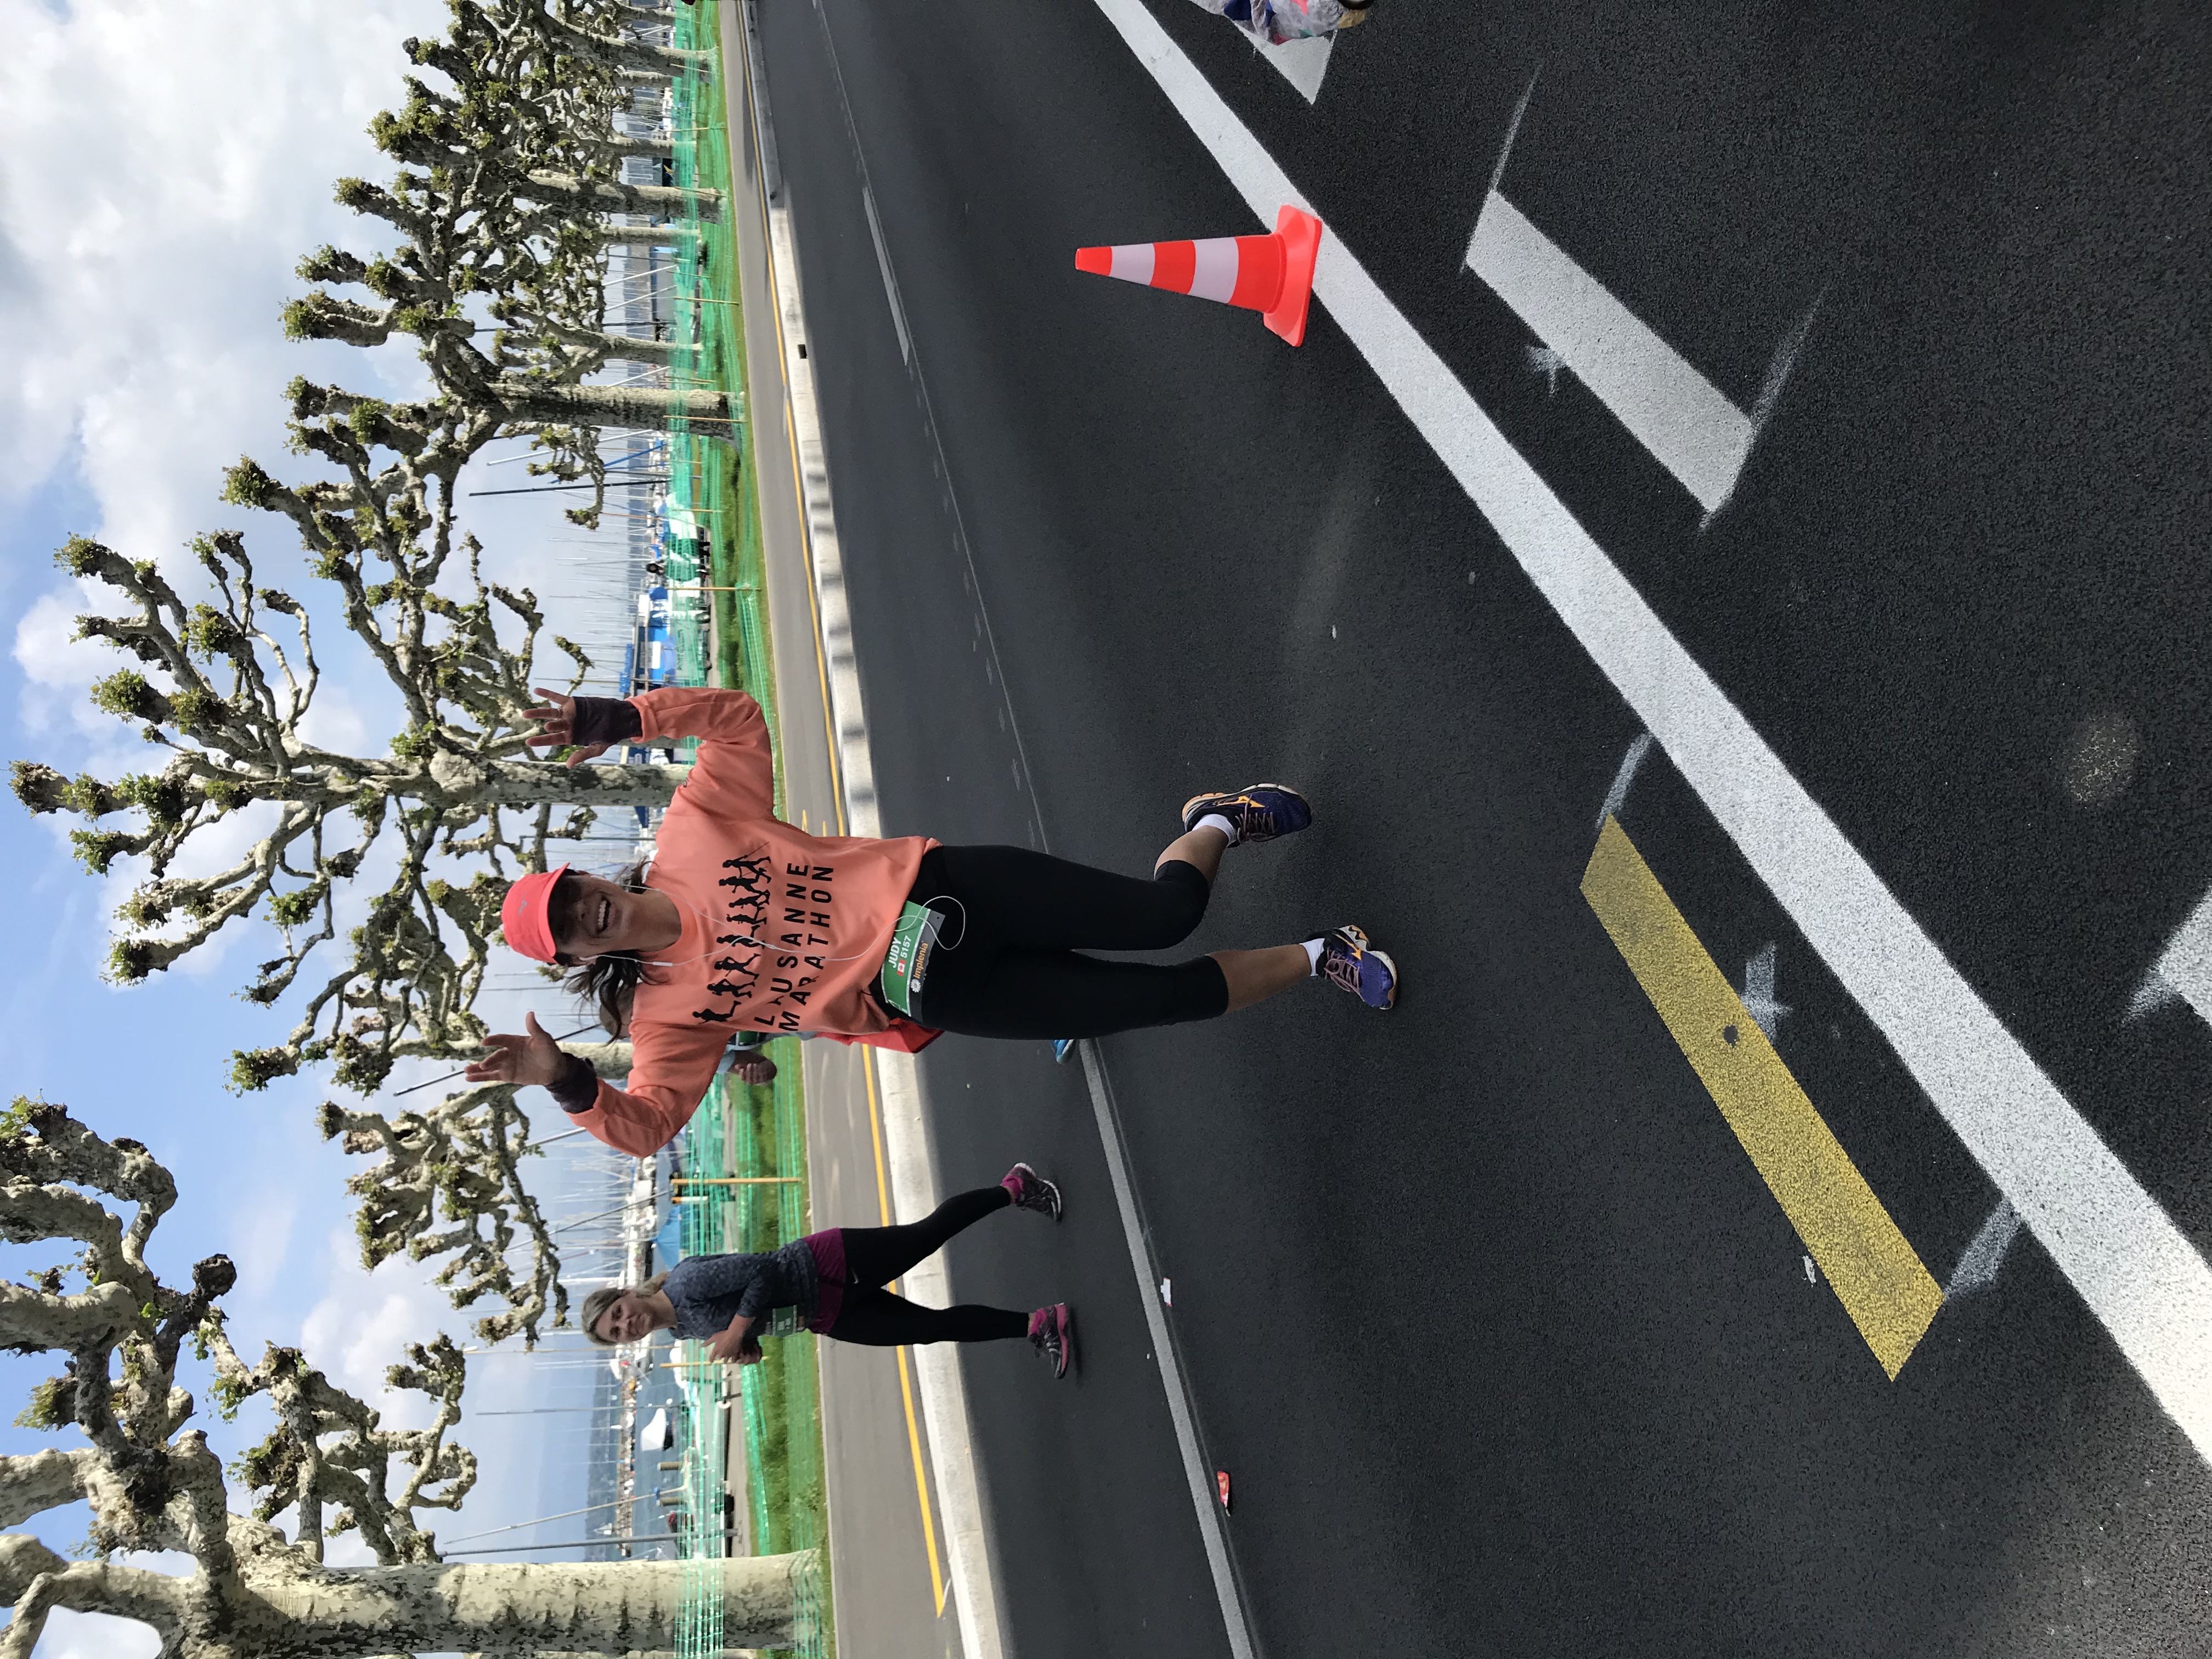 The crazy person totally elated that she's still standing at KM 17 :) 